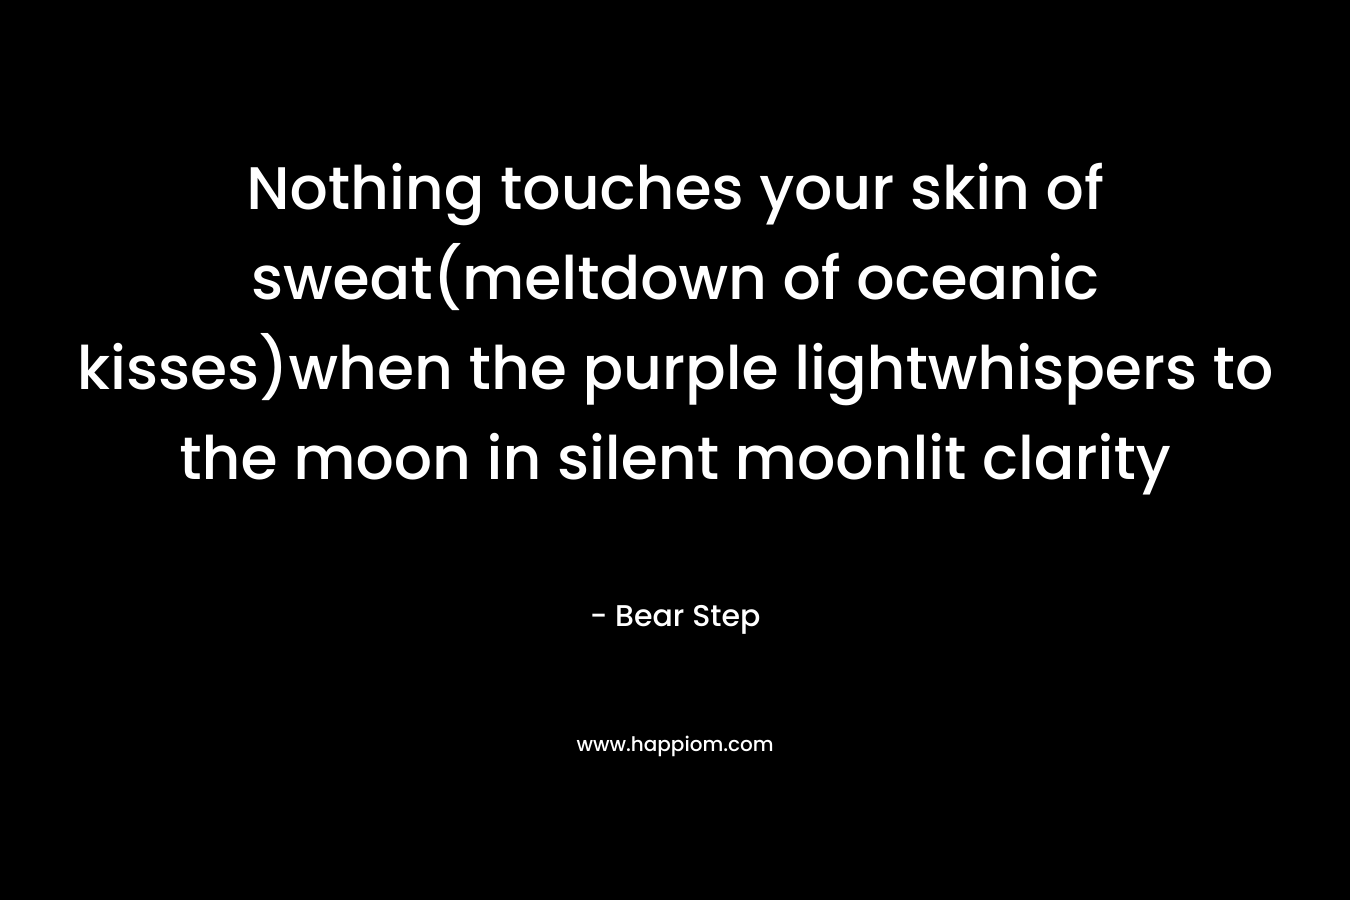 Nothing touches your skin of sweat(meltdown of oceanic kisses)when the purple lightwhispers to the moon in silent moonlit clarity – Bear Step